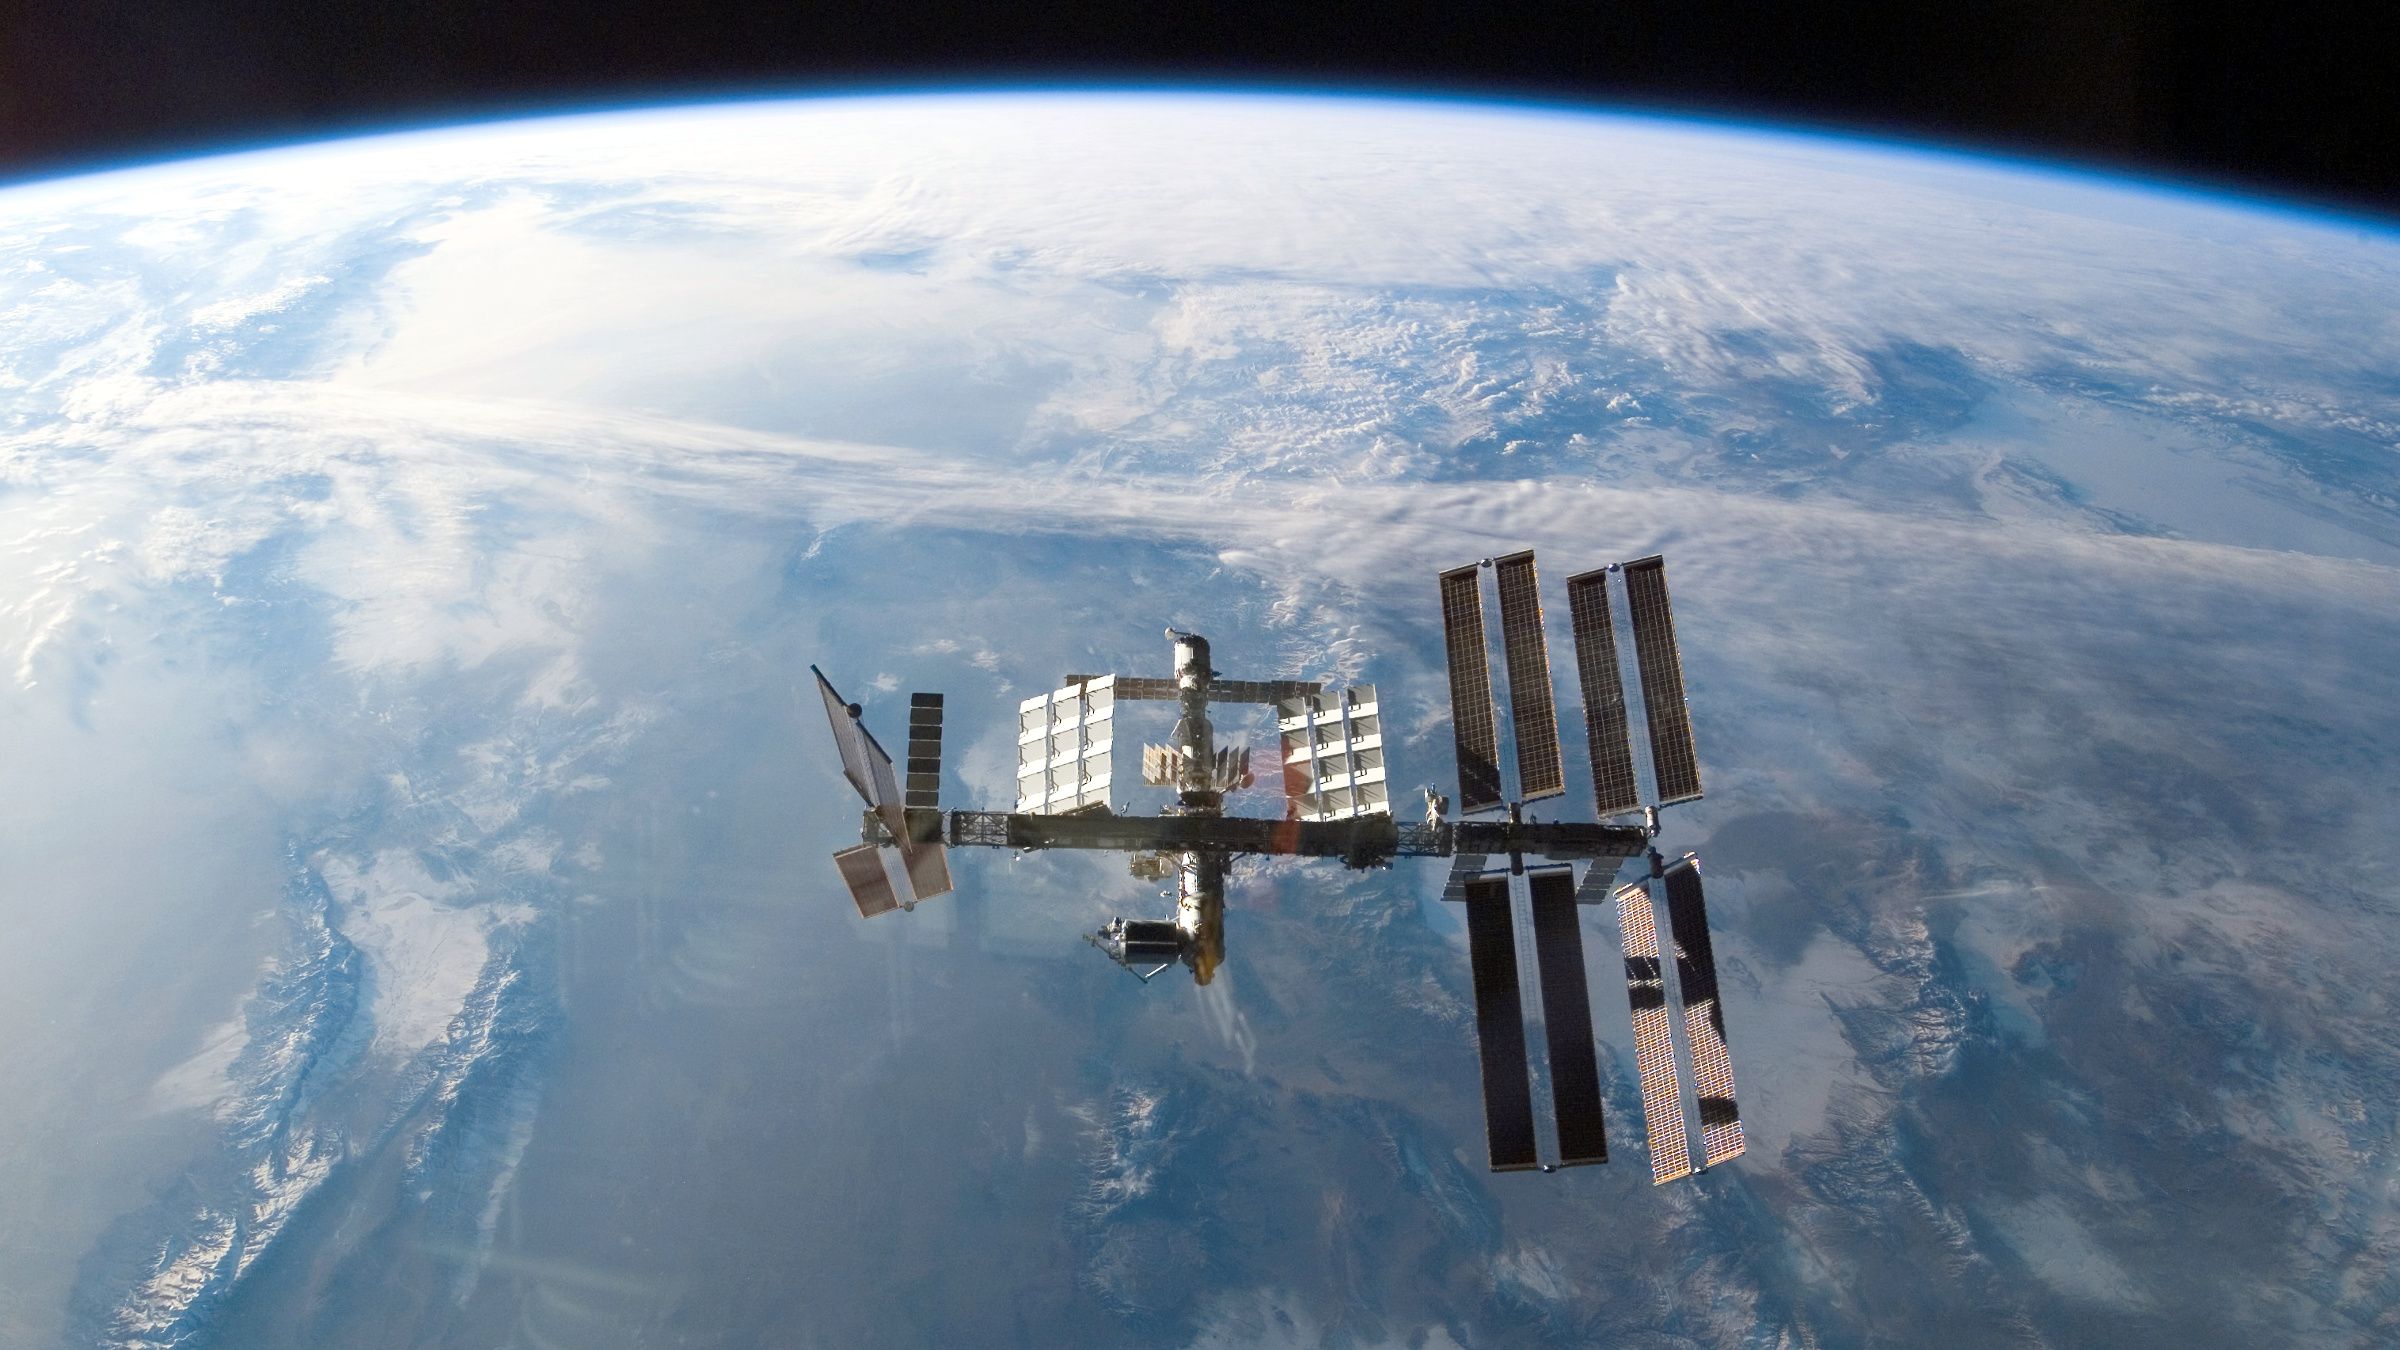 international wallpaper,space station,satellite,outer space,atmosphere,spacecraft